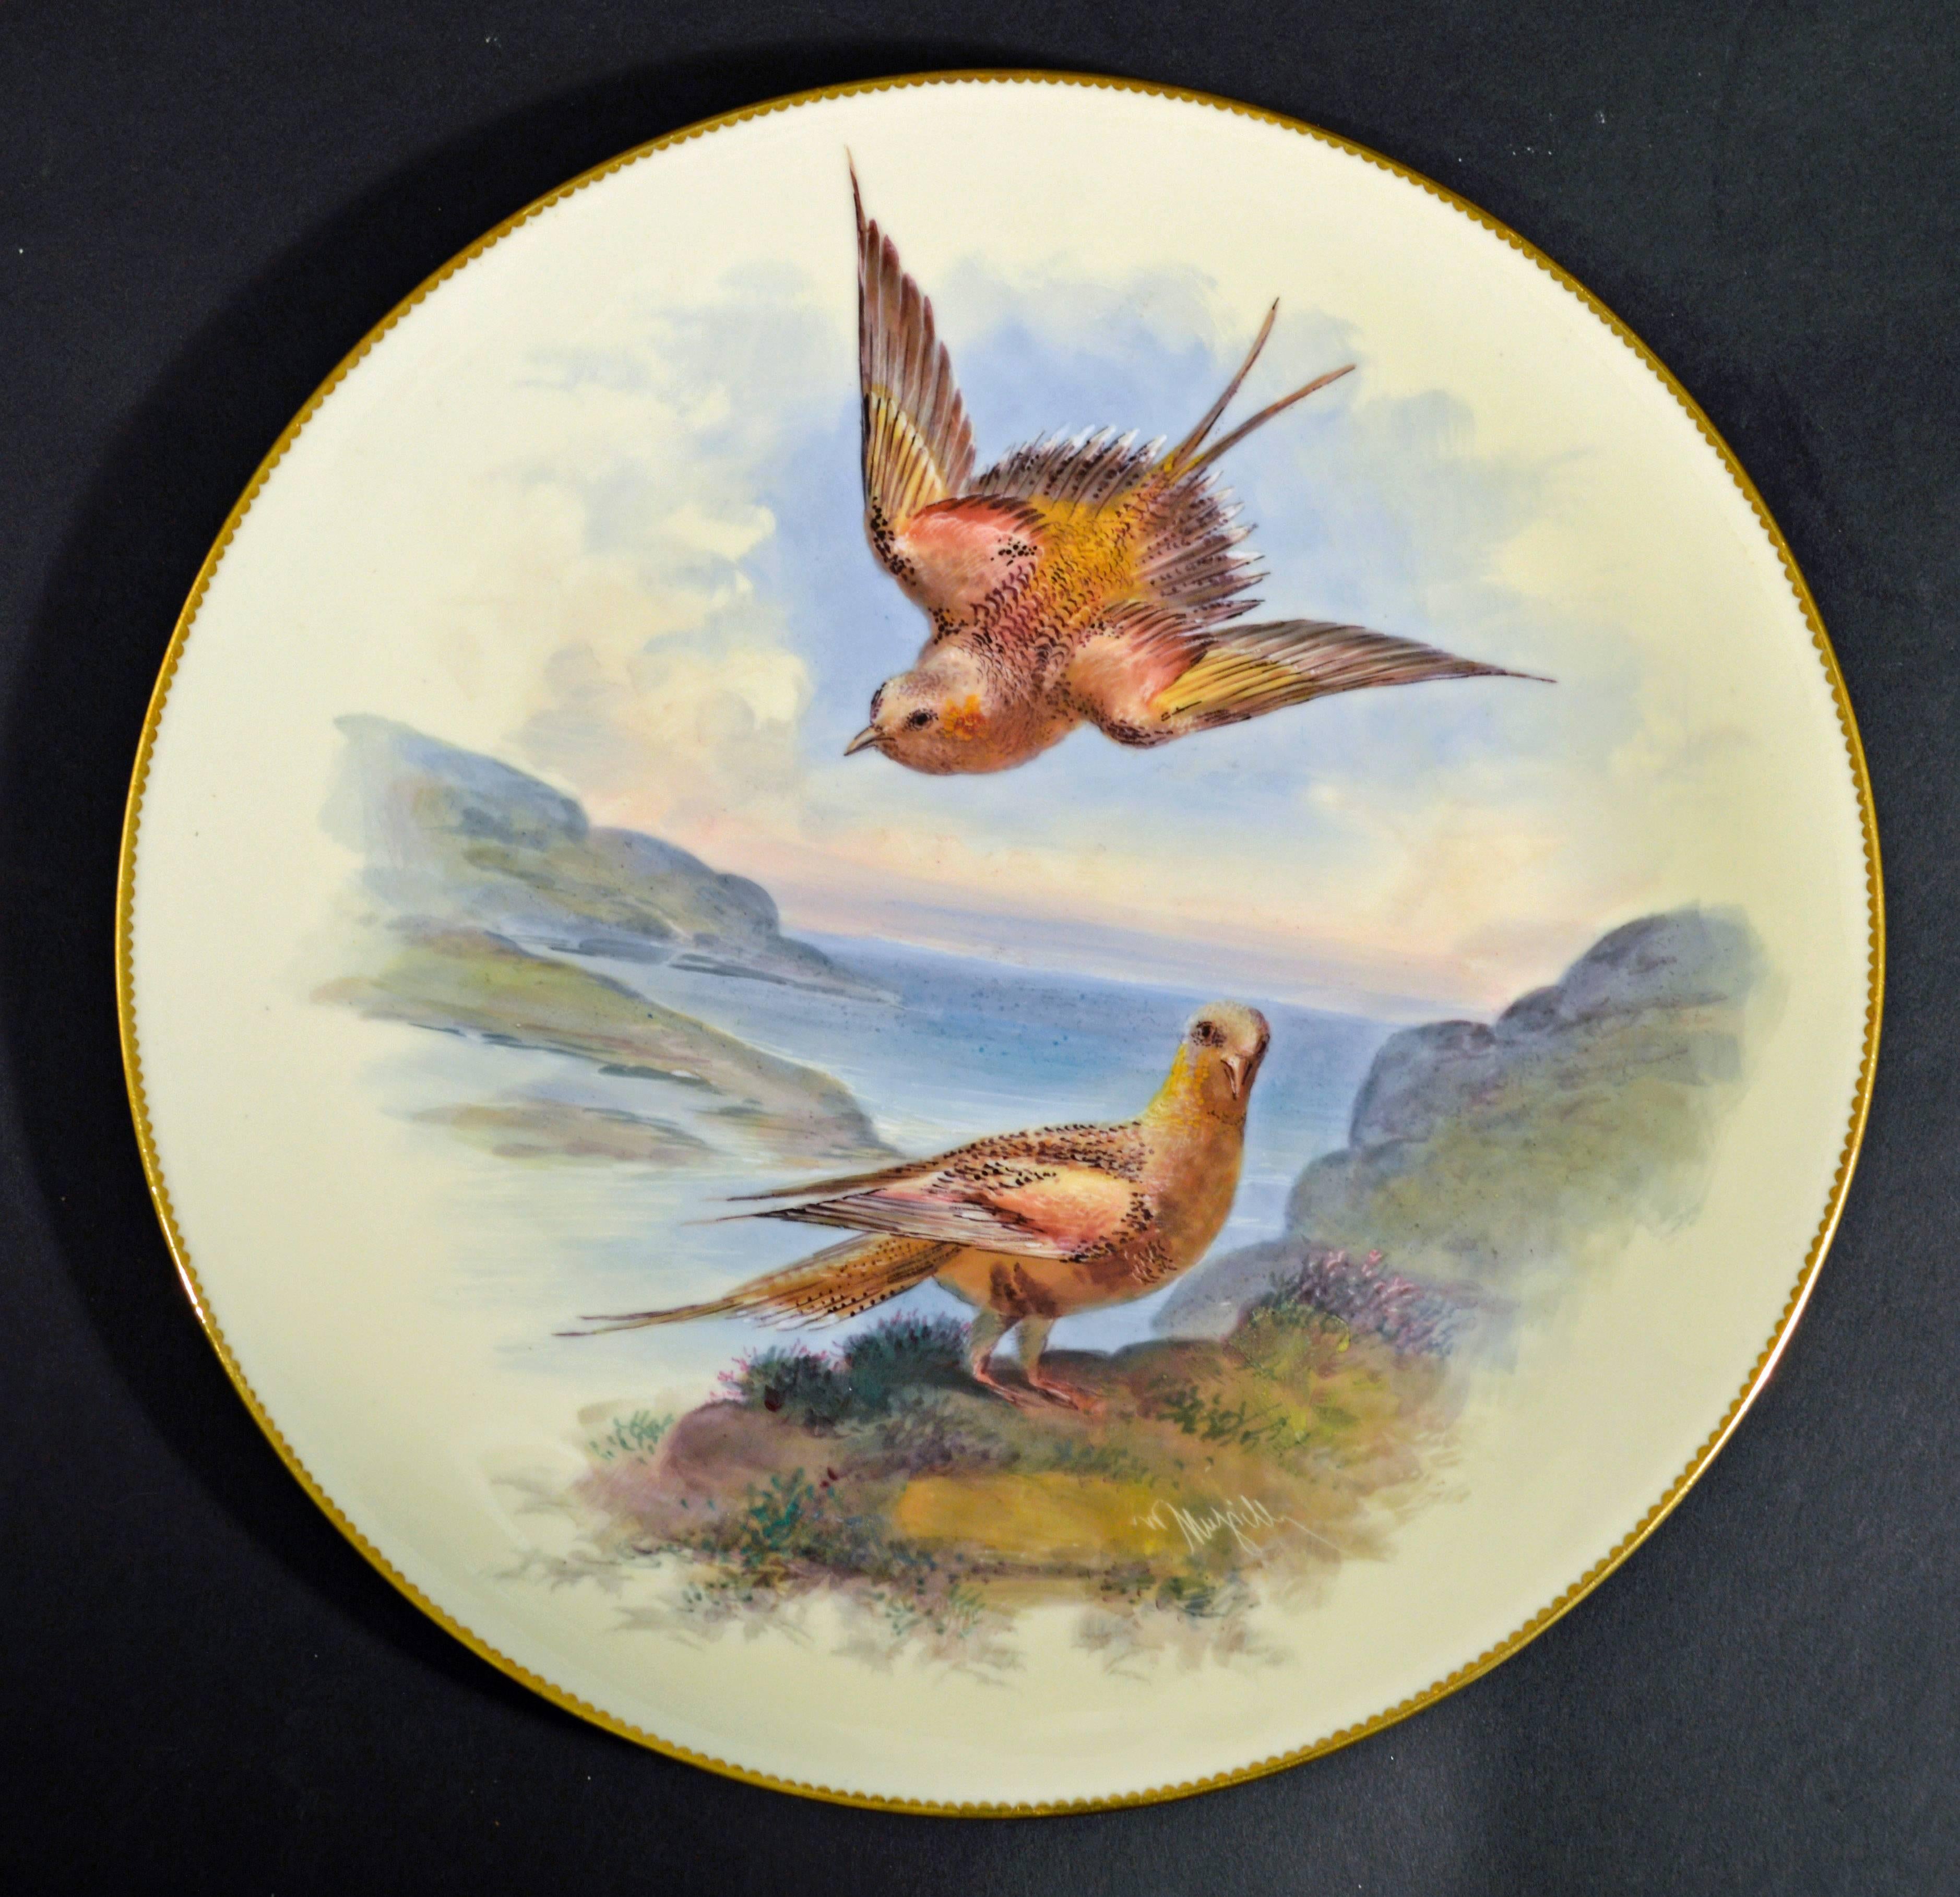 British Thomas Minton Porcelain Bird Cabinet Plates, Signed by William Mussil.